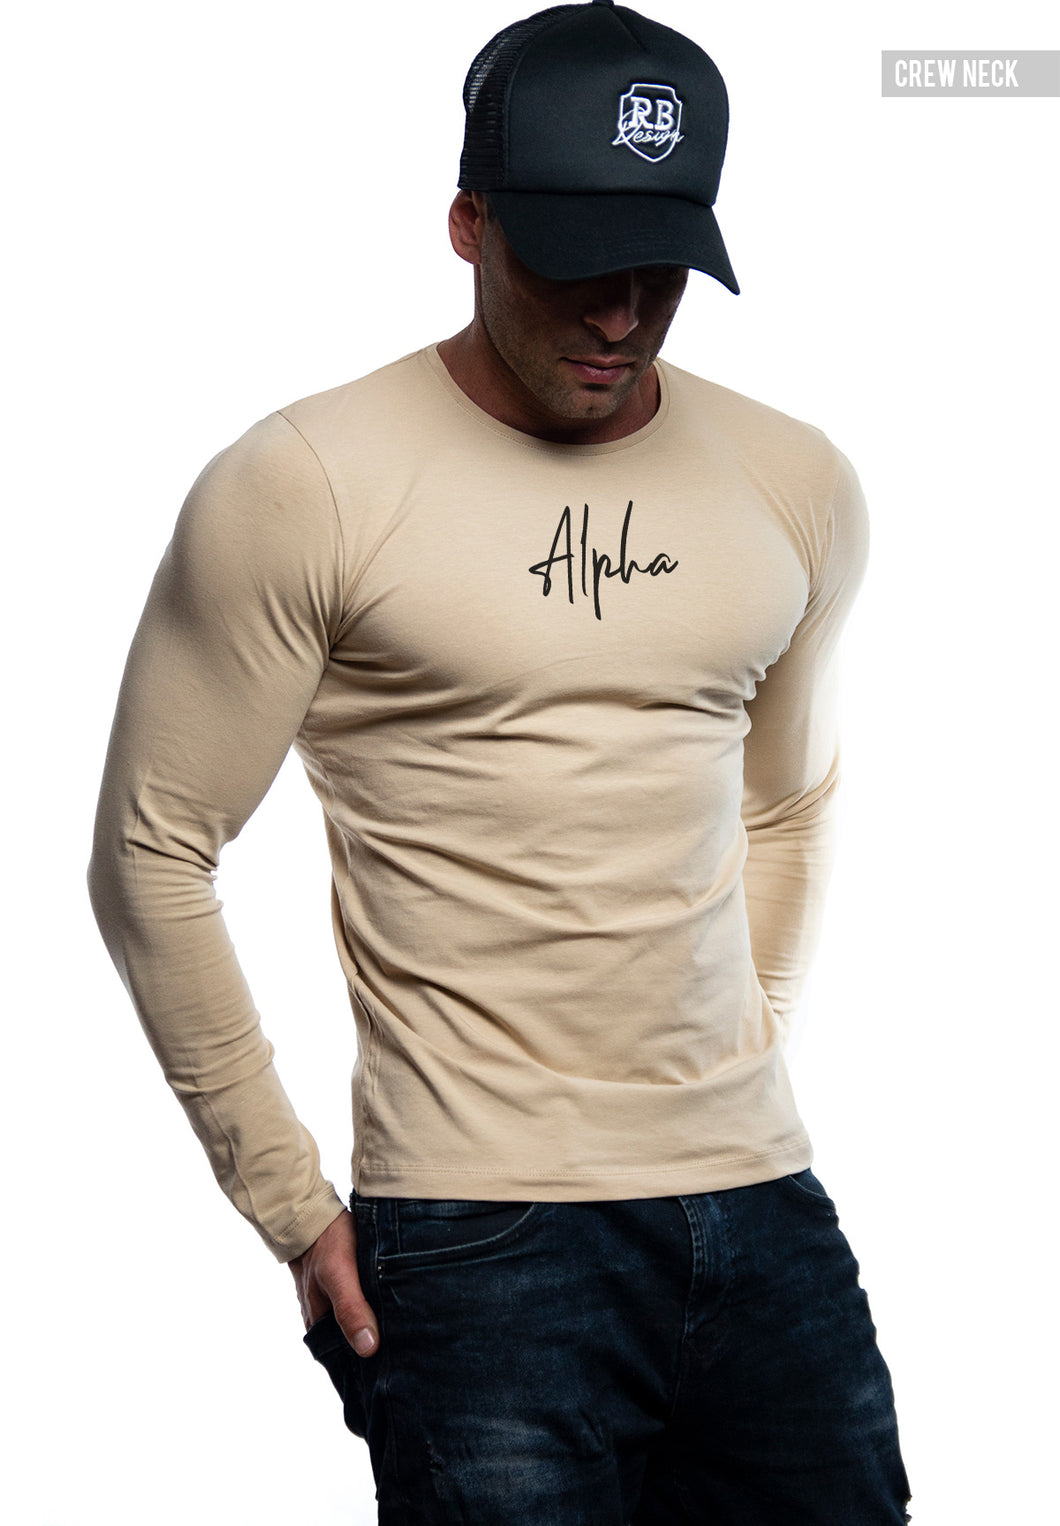 Men's Long Sleeve T-shirts / Fit Clothing Online / Casual Tees – RB Design Store